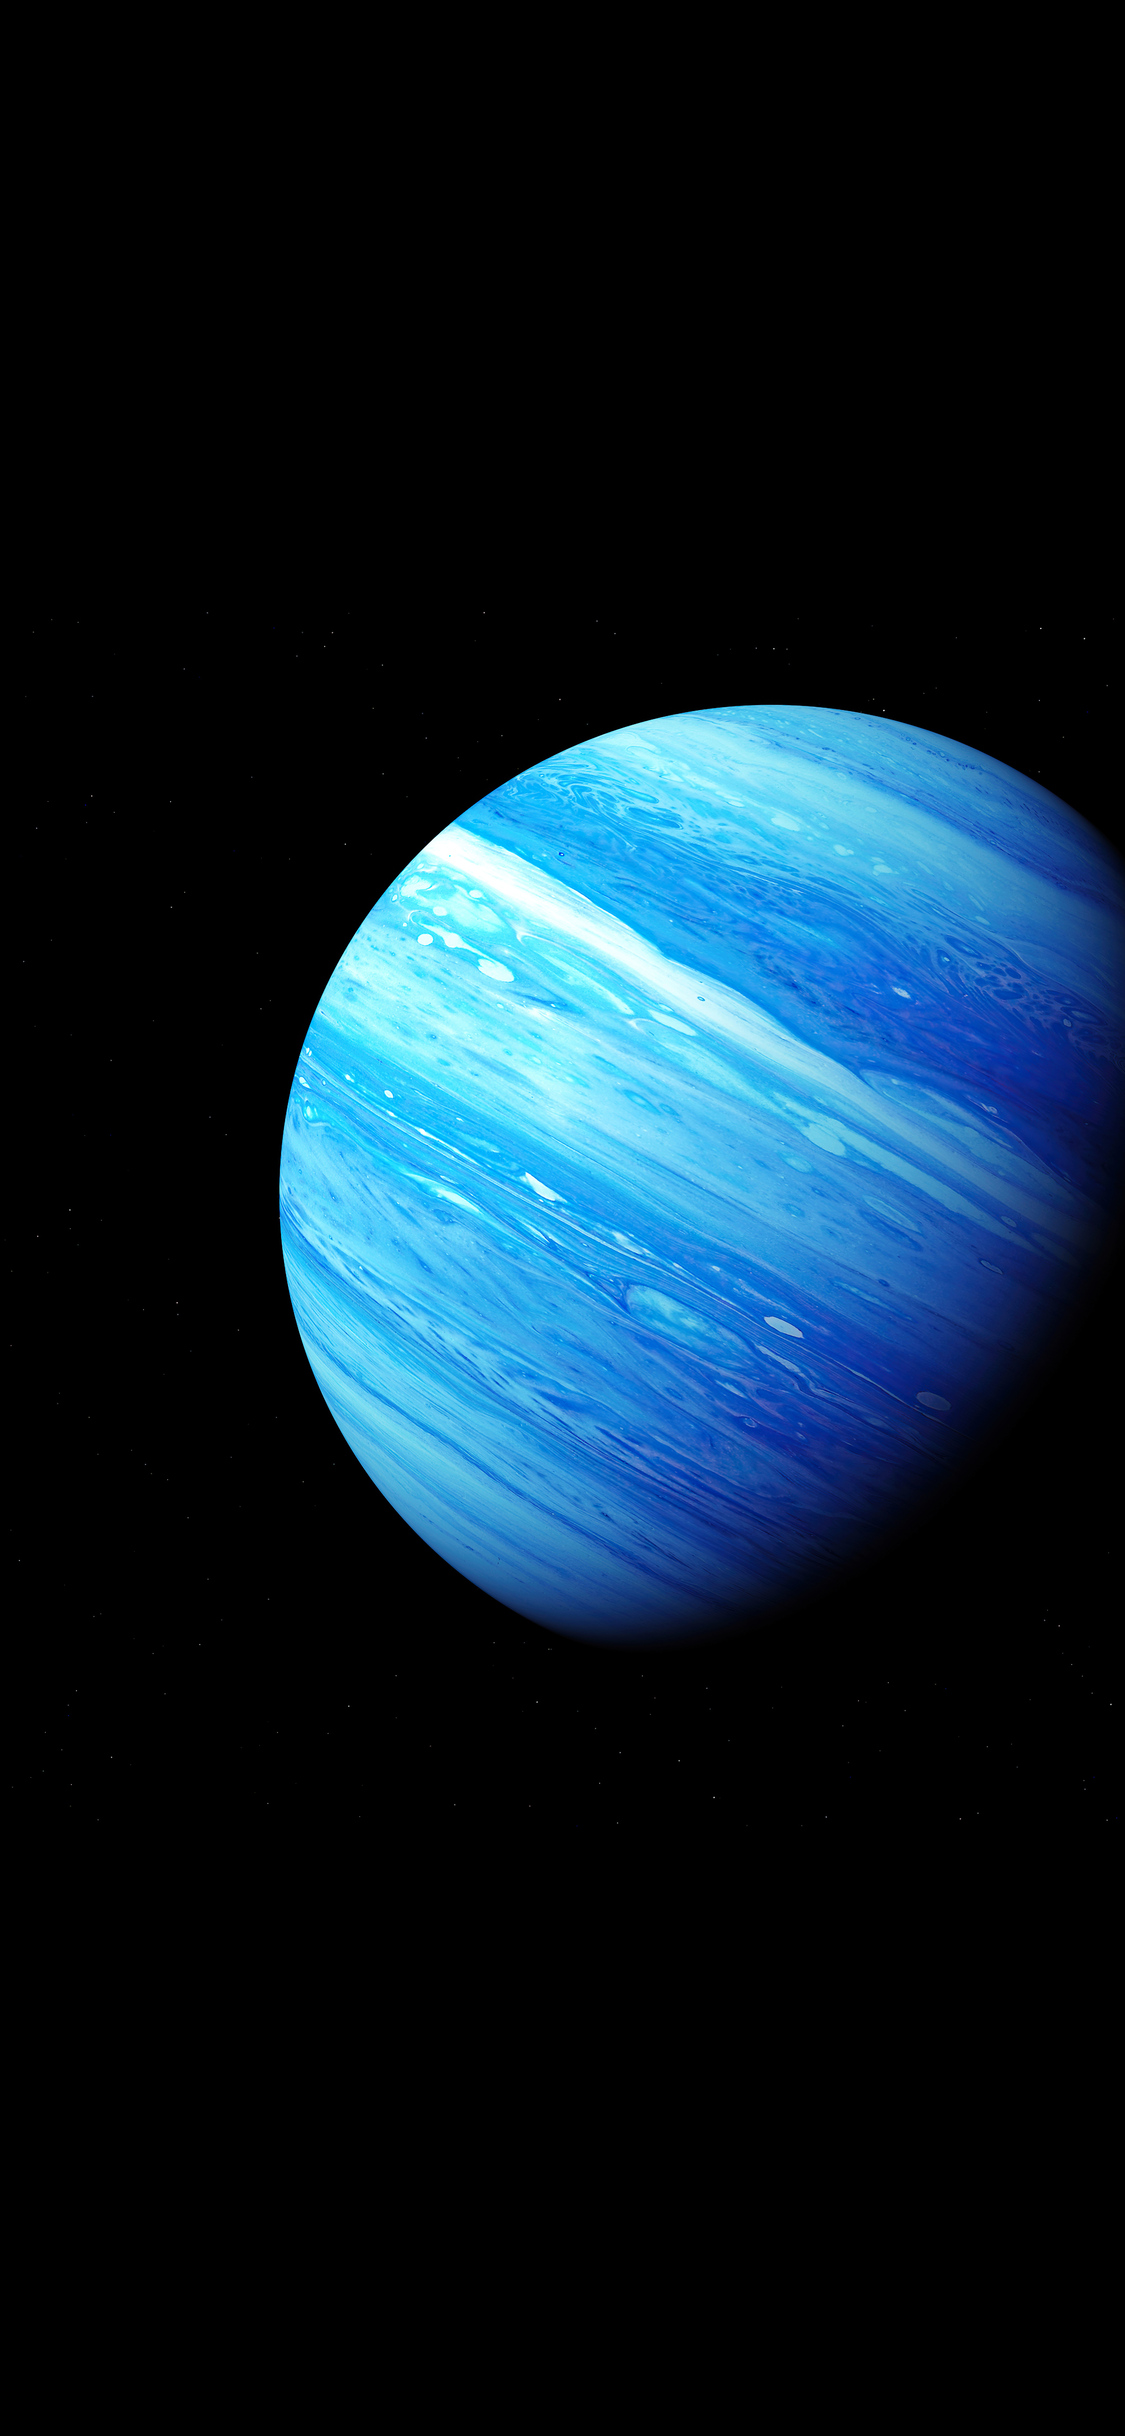 A blue planet with a black background - Planet